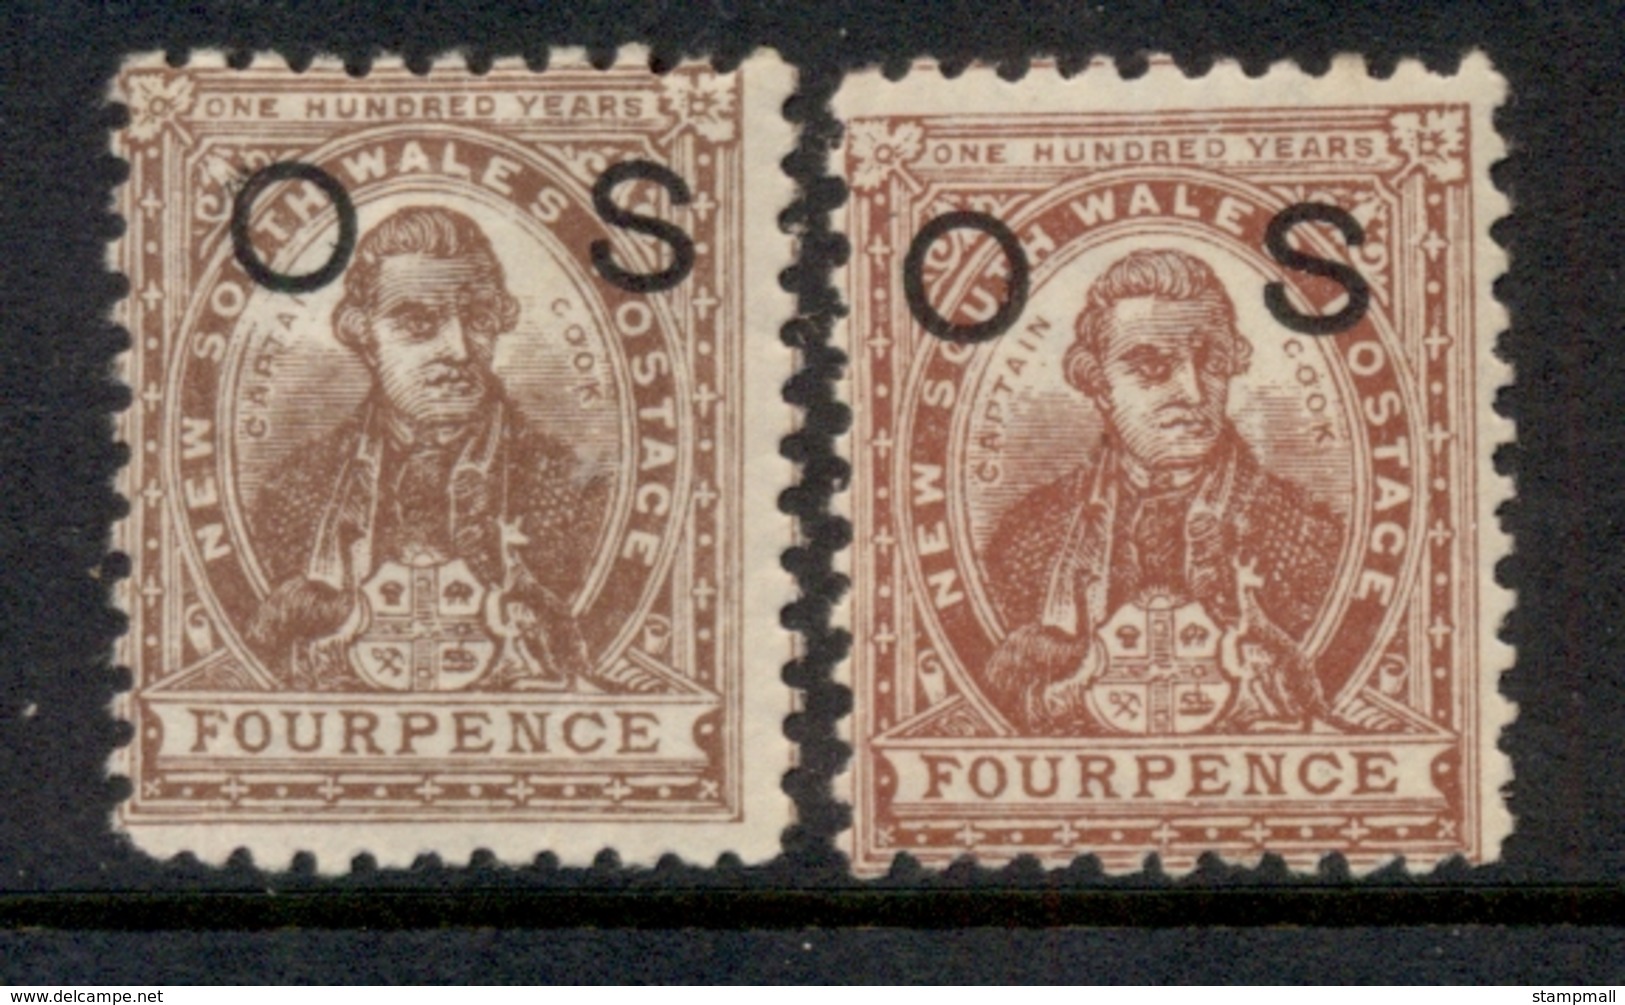 NSW 1888-89 Capt Cook 4d Brown + Red Brown Opt OS MUH - Mint Stamps